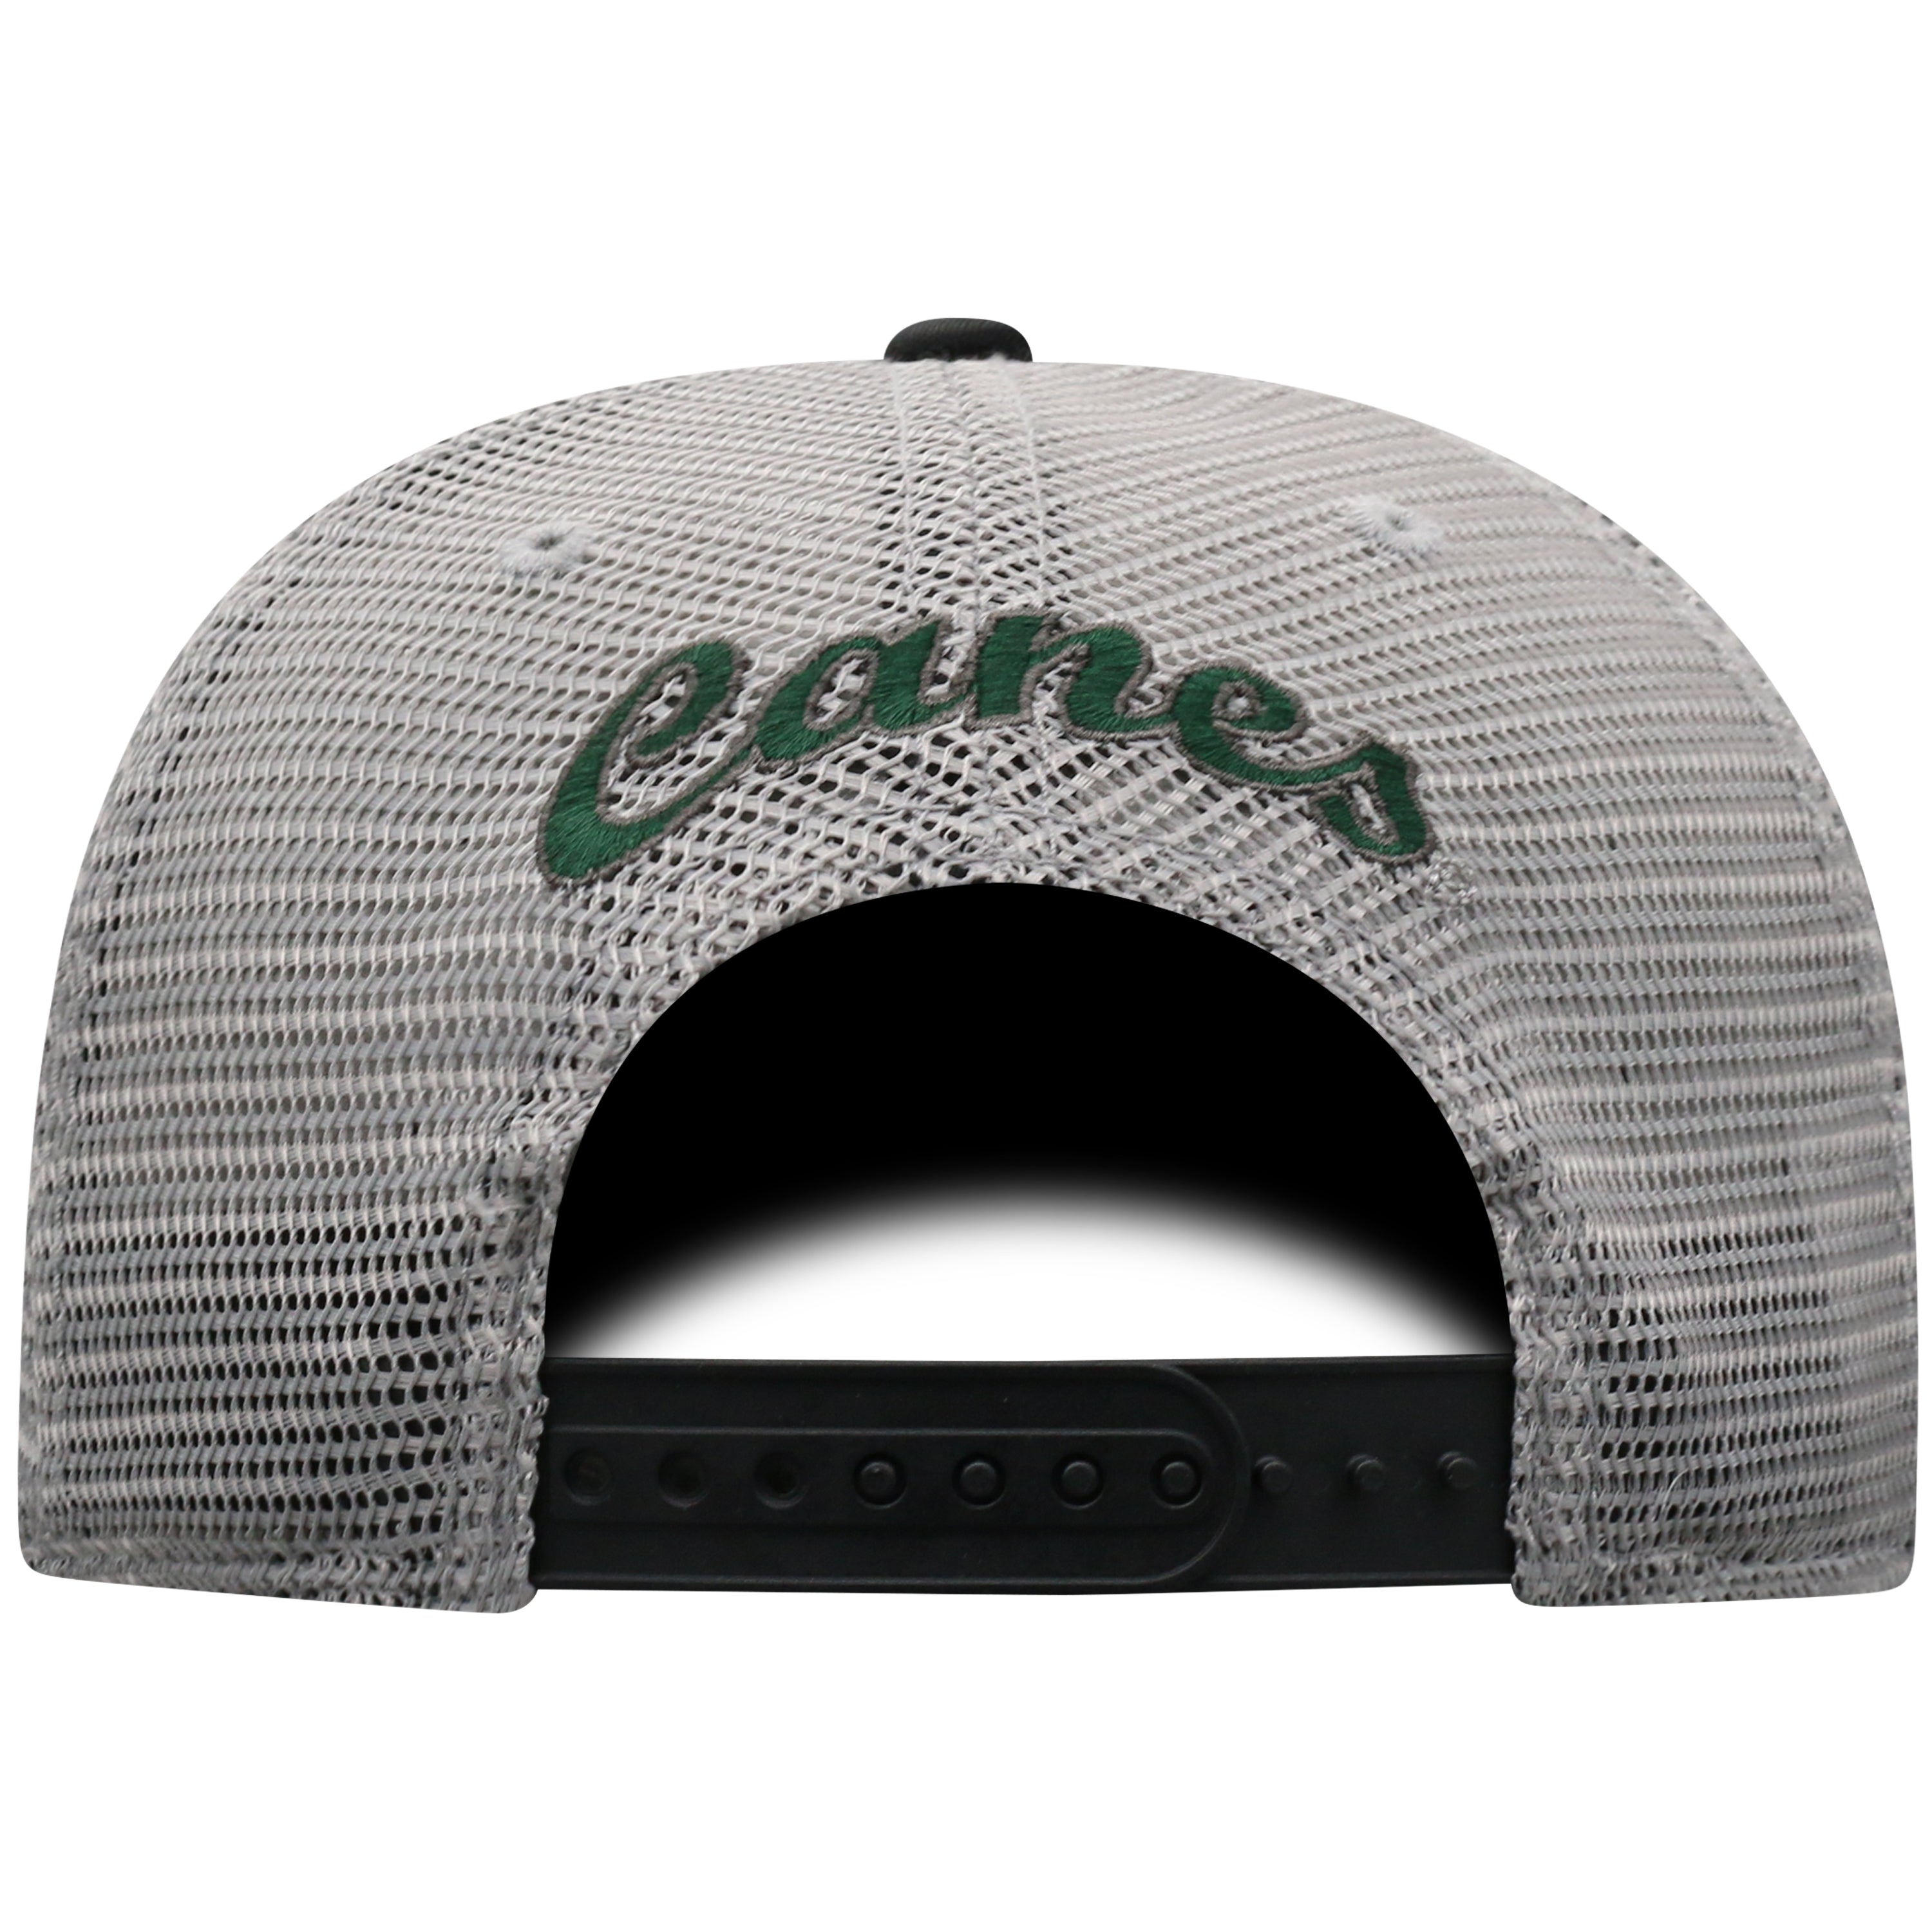 Miami Hurricanes Women's Top of the World Inflate Adjustable Hat- Black/Grey